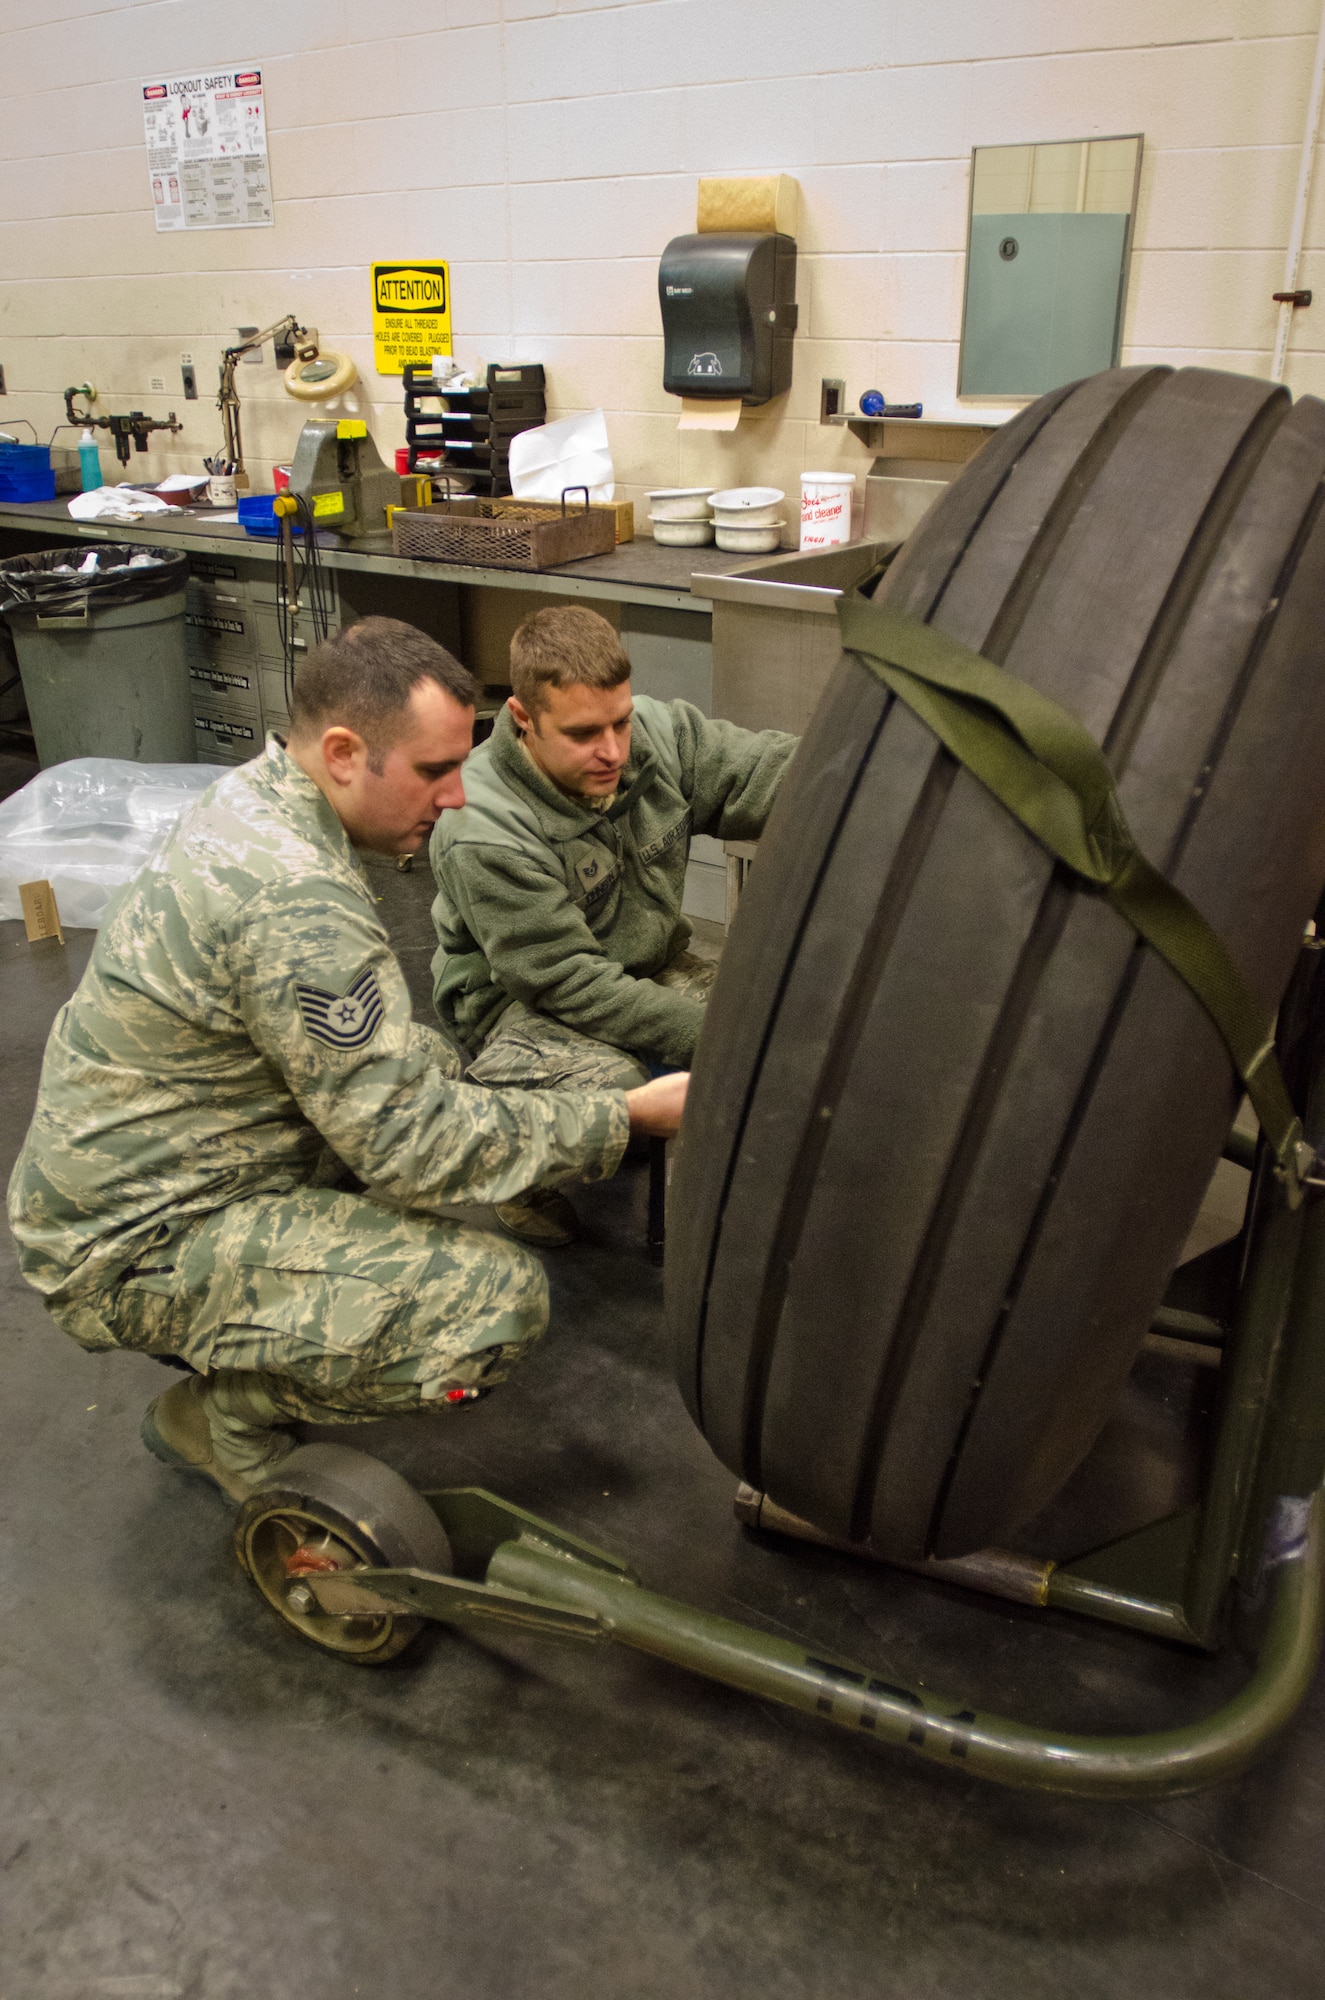 Tech. Sgt. Mike Johnson (right), a crew chief from the Kentucky Air National Guard's 123rd Aircraft Maintenance Squadron, speaks to Staff Sgt. Brian Hinckley, a crew chief from the Connecticut Air National Guard's 103rd Aircraft Maintenance Squadron, about the tires of the C-130 Hercules aircraft at the Kentucky Air National Guard base in Louisville, Ky., on Nov. 14, 2013.  The Connecticut unit is converting from C-21A Learjets to the Hercules transport. (U.S. Air National Guard photo by Master Sgt. Phil Speck)